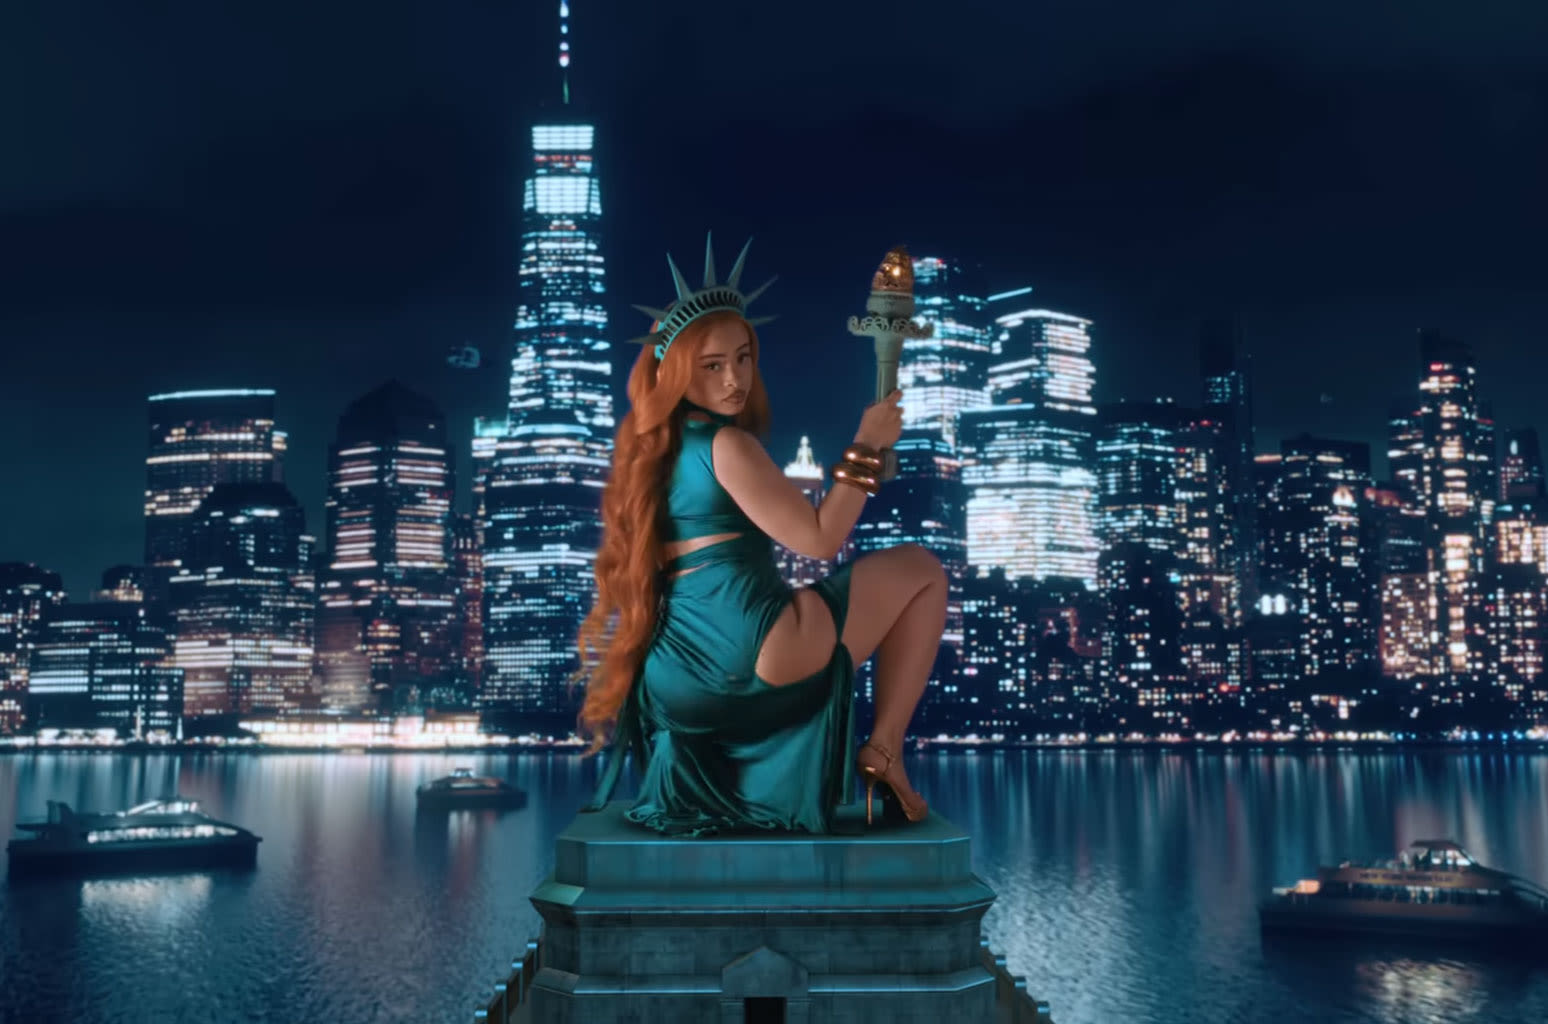 Ice Spice Transforms Into the Statue of Liberty for NYC-Themed ‘Oh Shhh…’ Video With Travis Scott